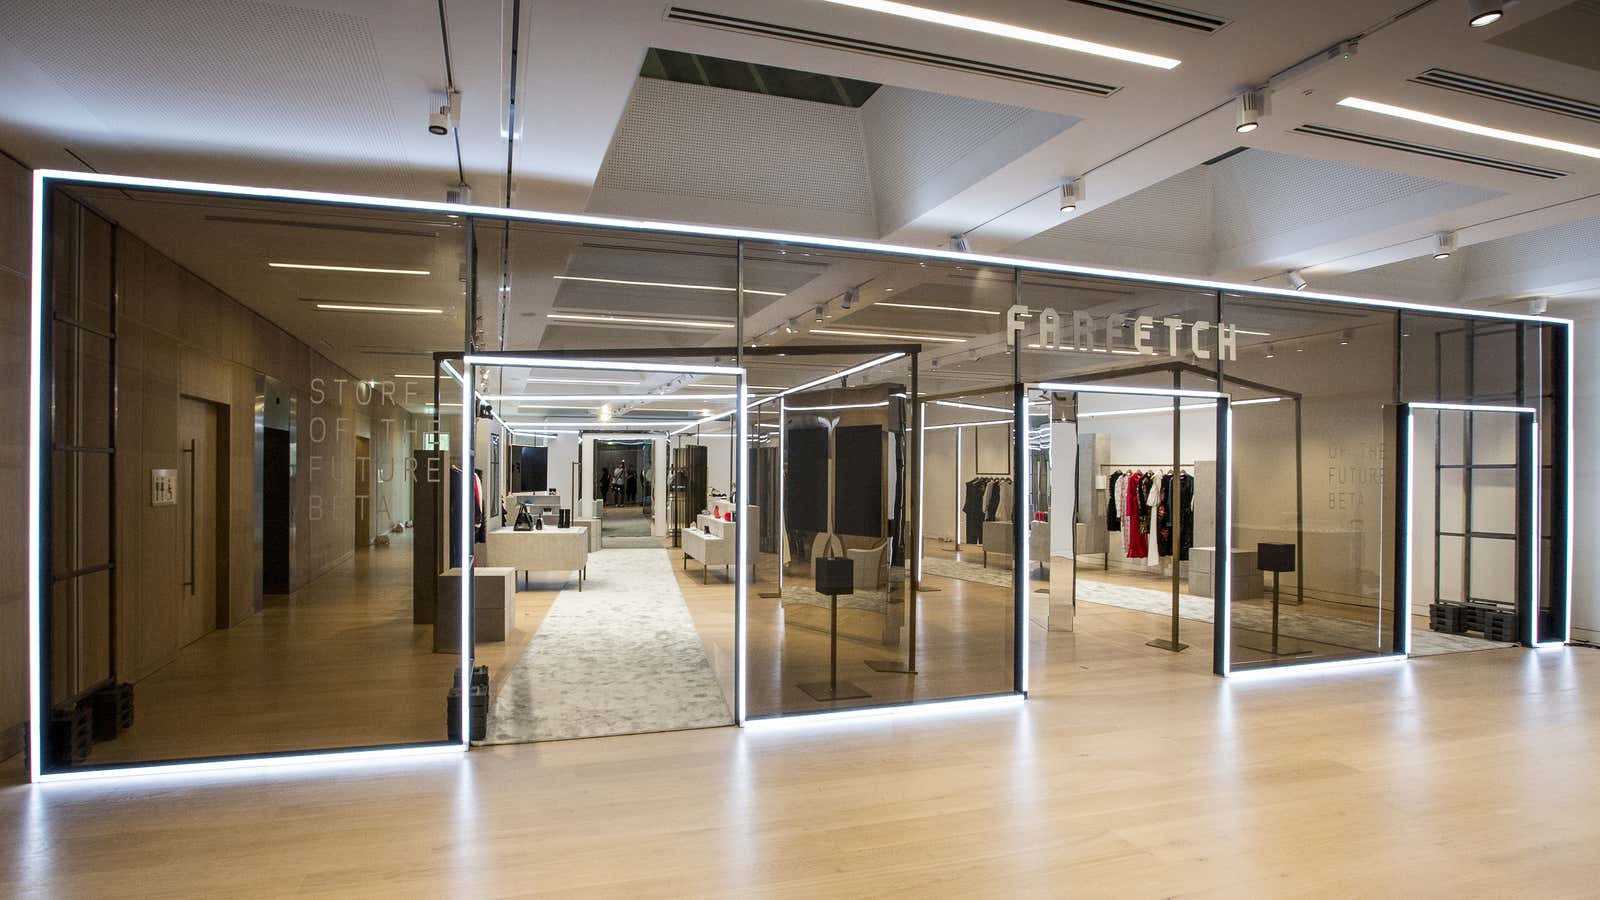 Step on into the future of retail, at least as Farfetch sees it.